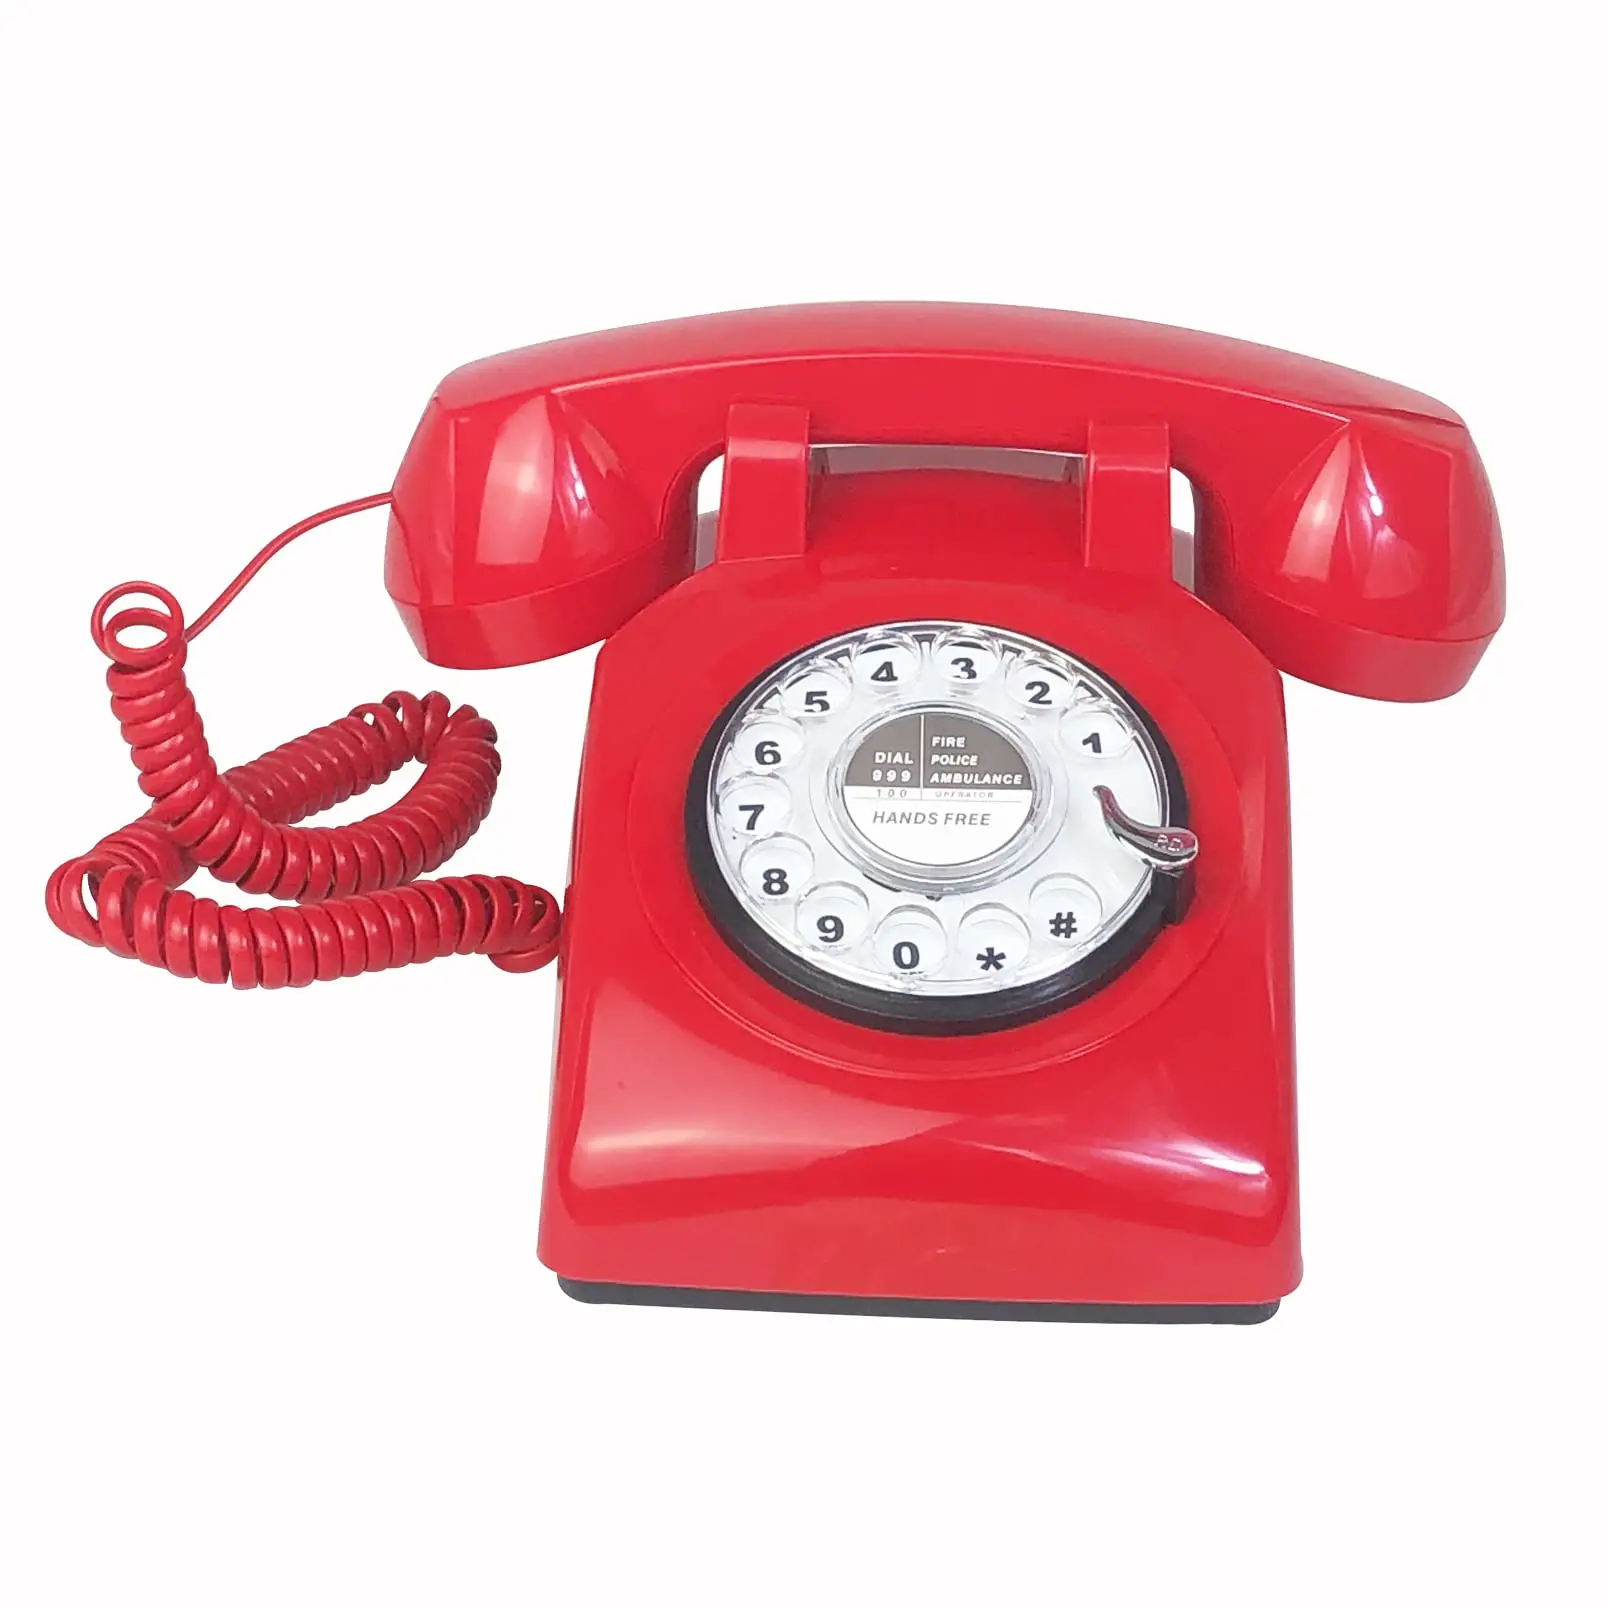 Black Retro Telephone Classic Vintage Rotary Dial Hands Free Landline Phone for Home/Office/Hotel, Antique Phones for Senior